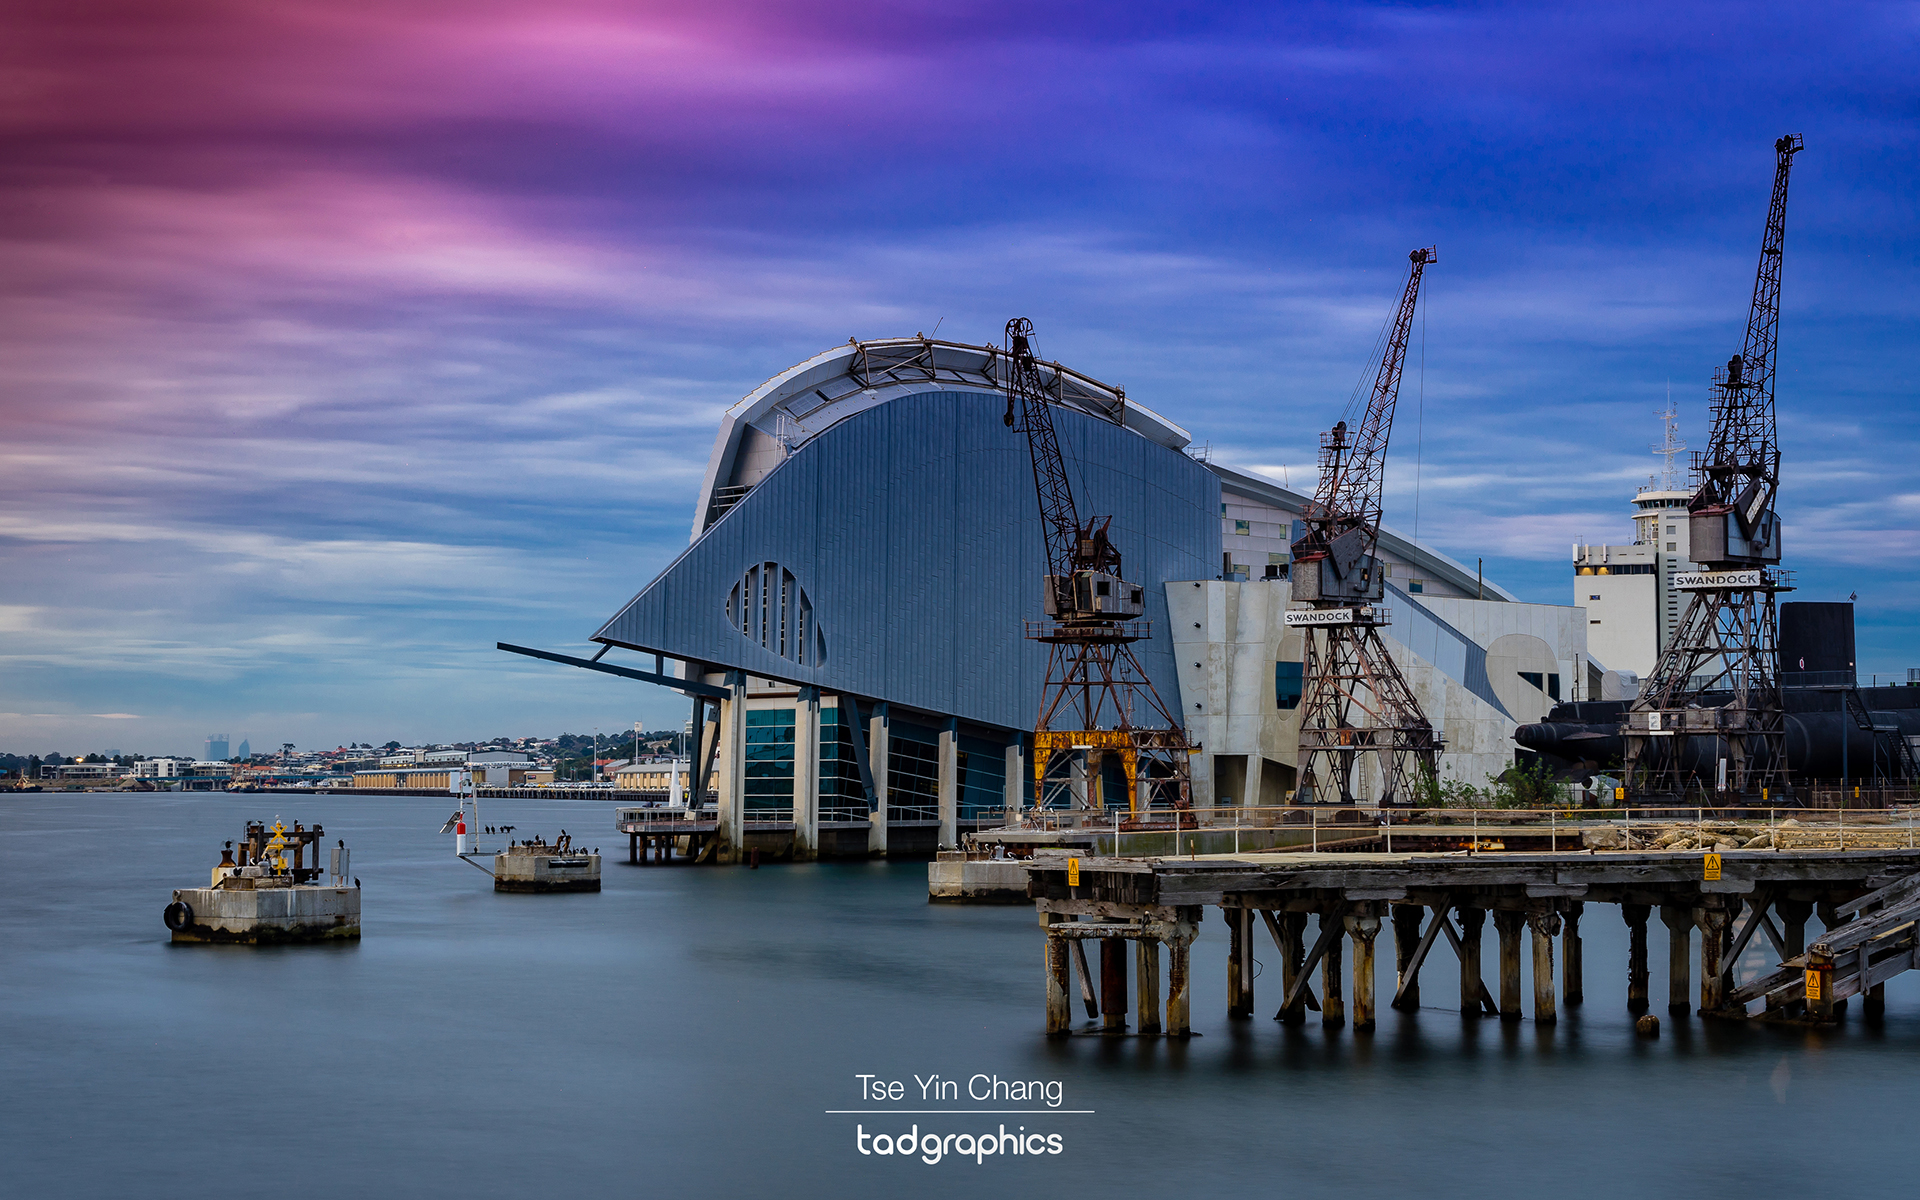 The Maritime Museum is a great location for sunset photography